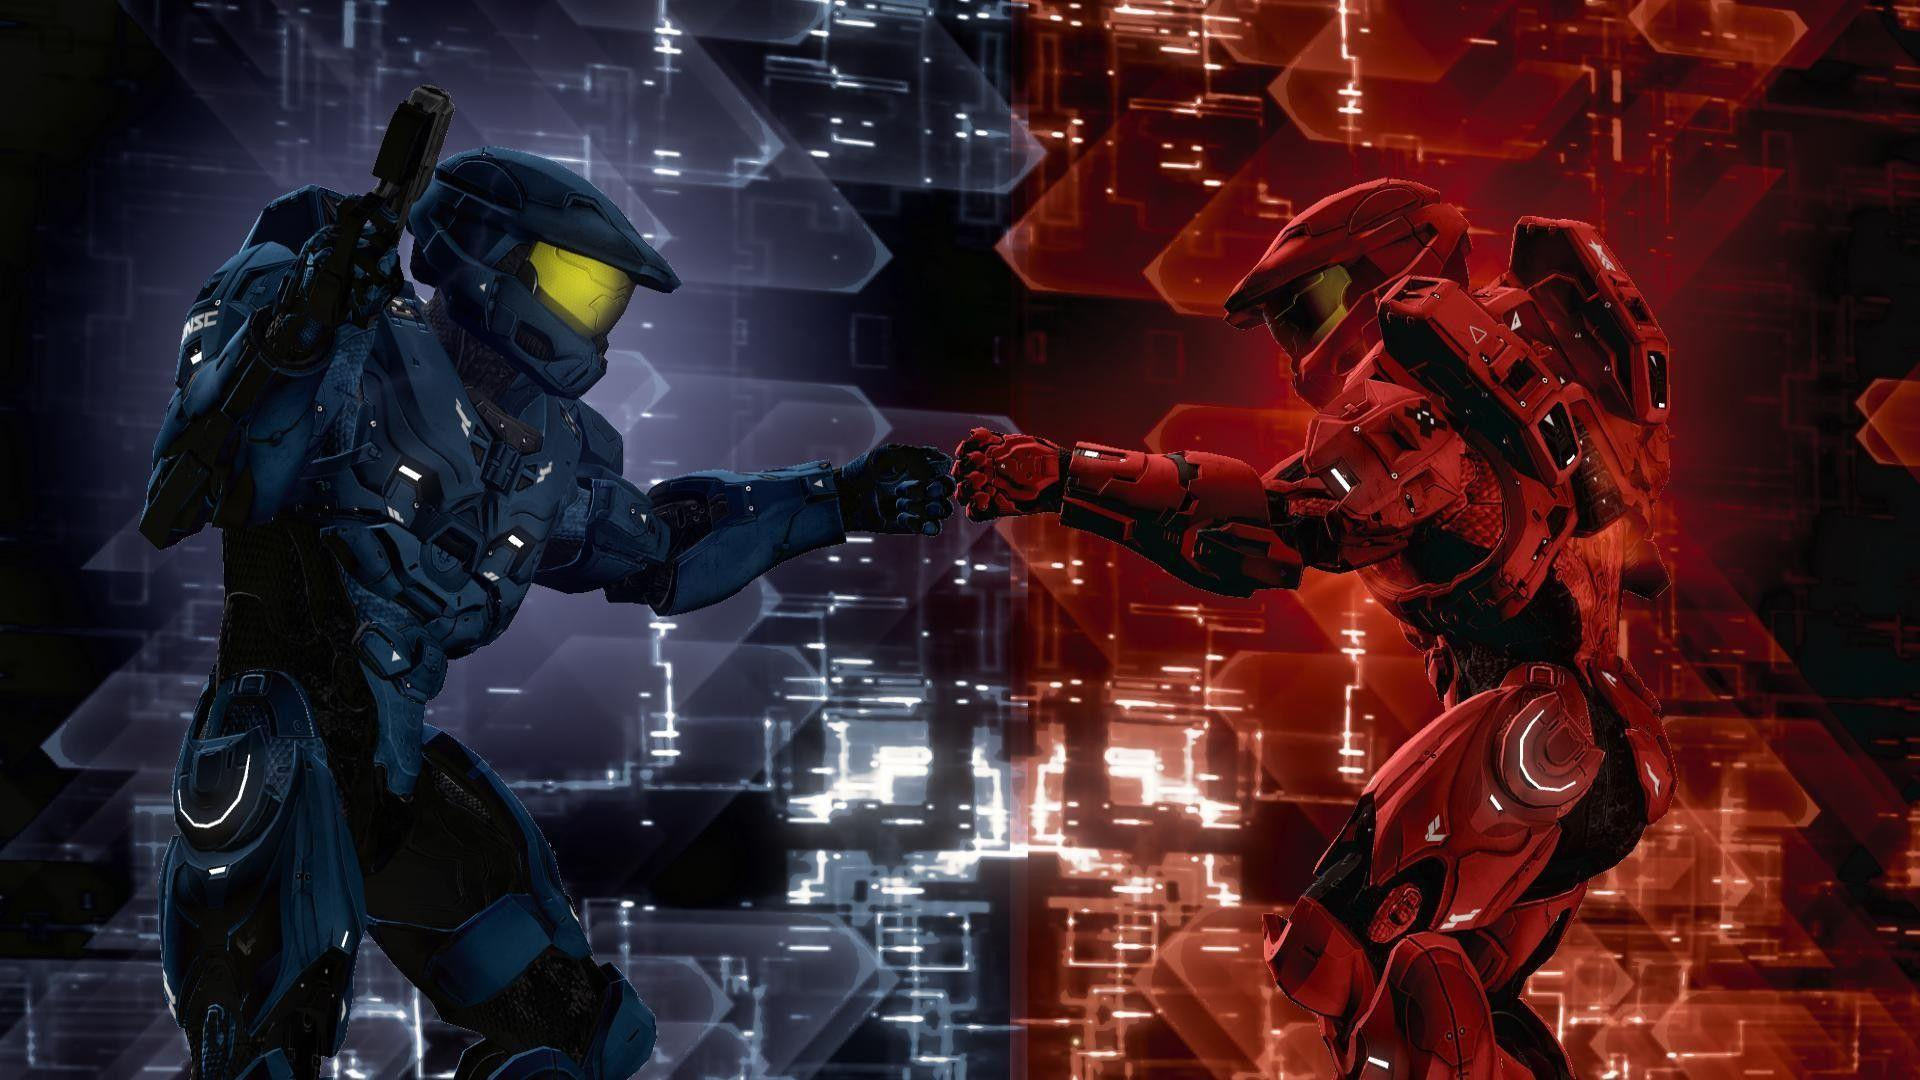 1920x1080 Halo Red Vs Blue Project Freelancer Wallpapers